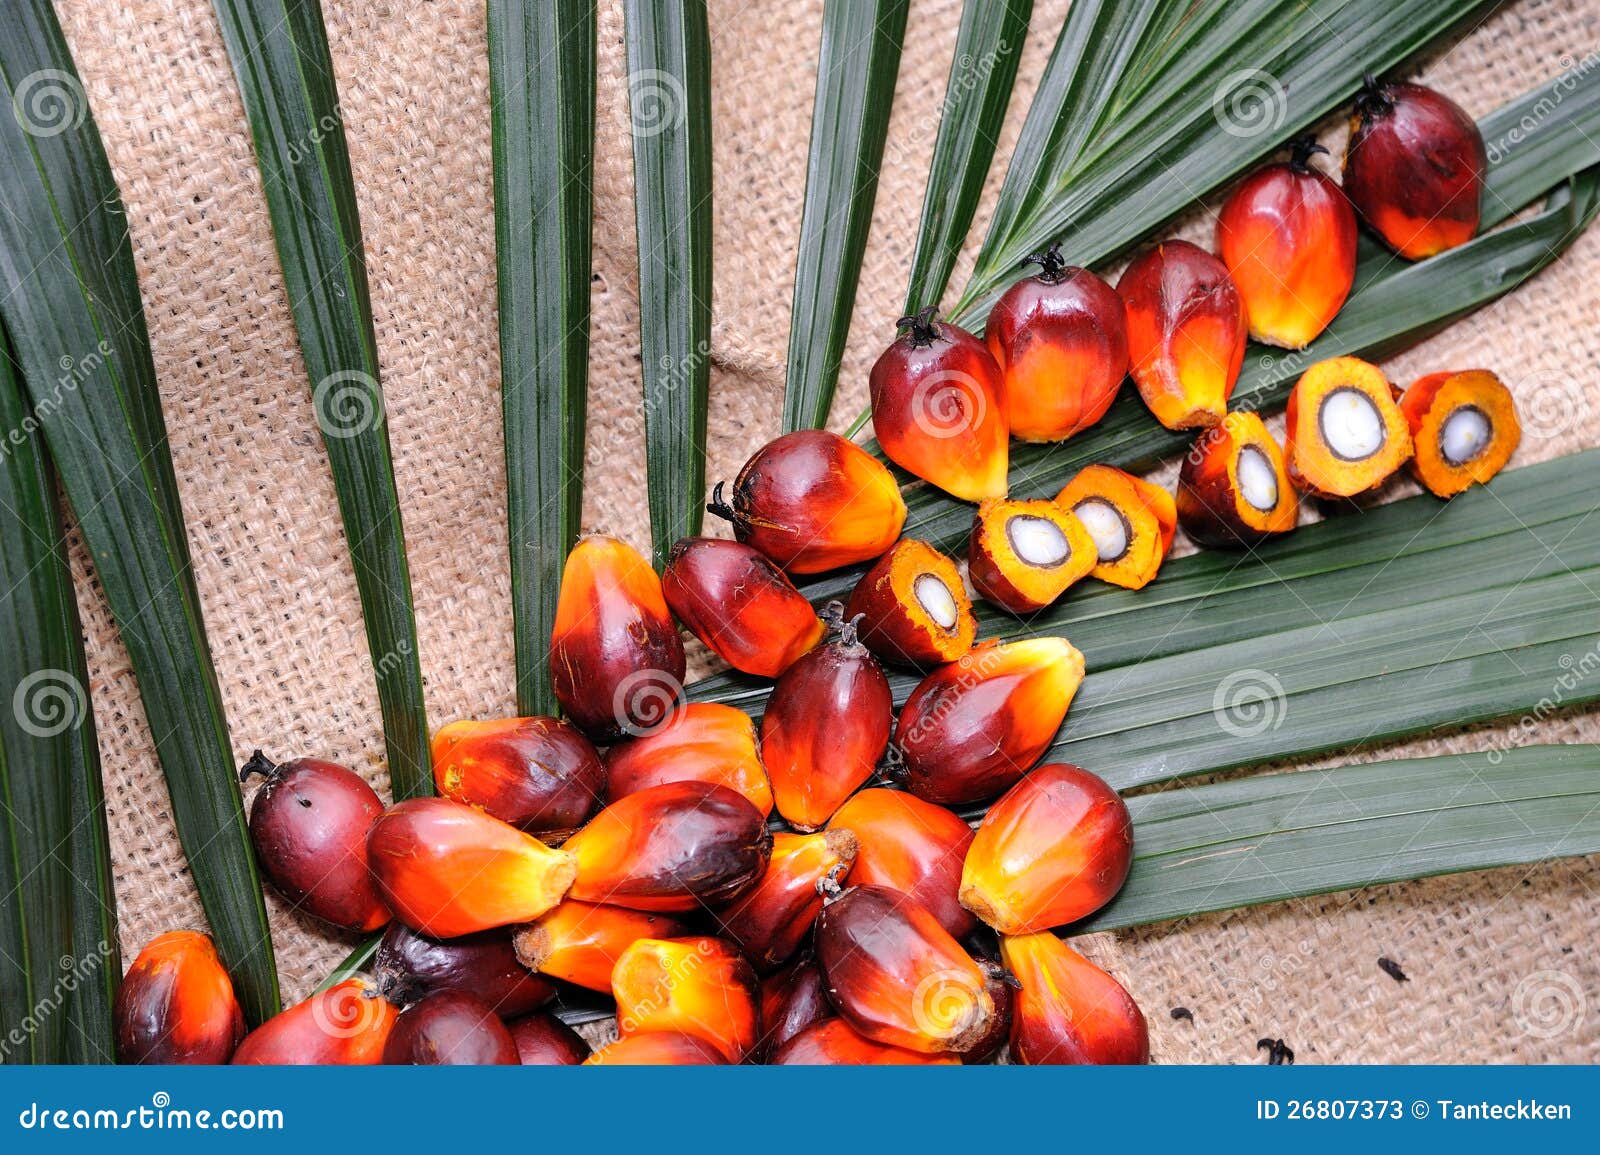  Palm Oil seeds  stock image Image of cultivated 